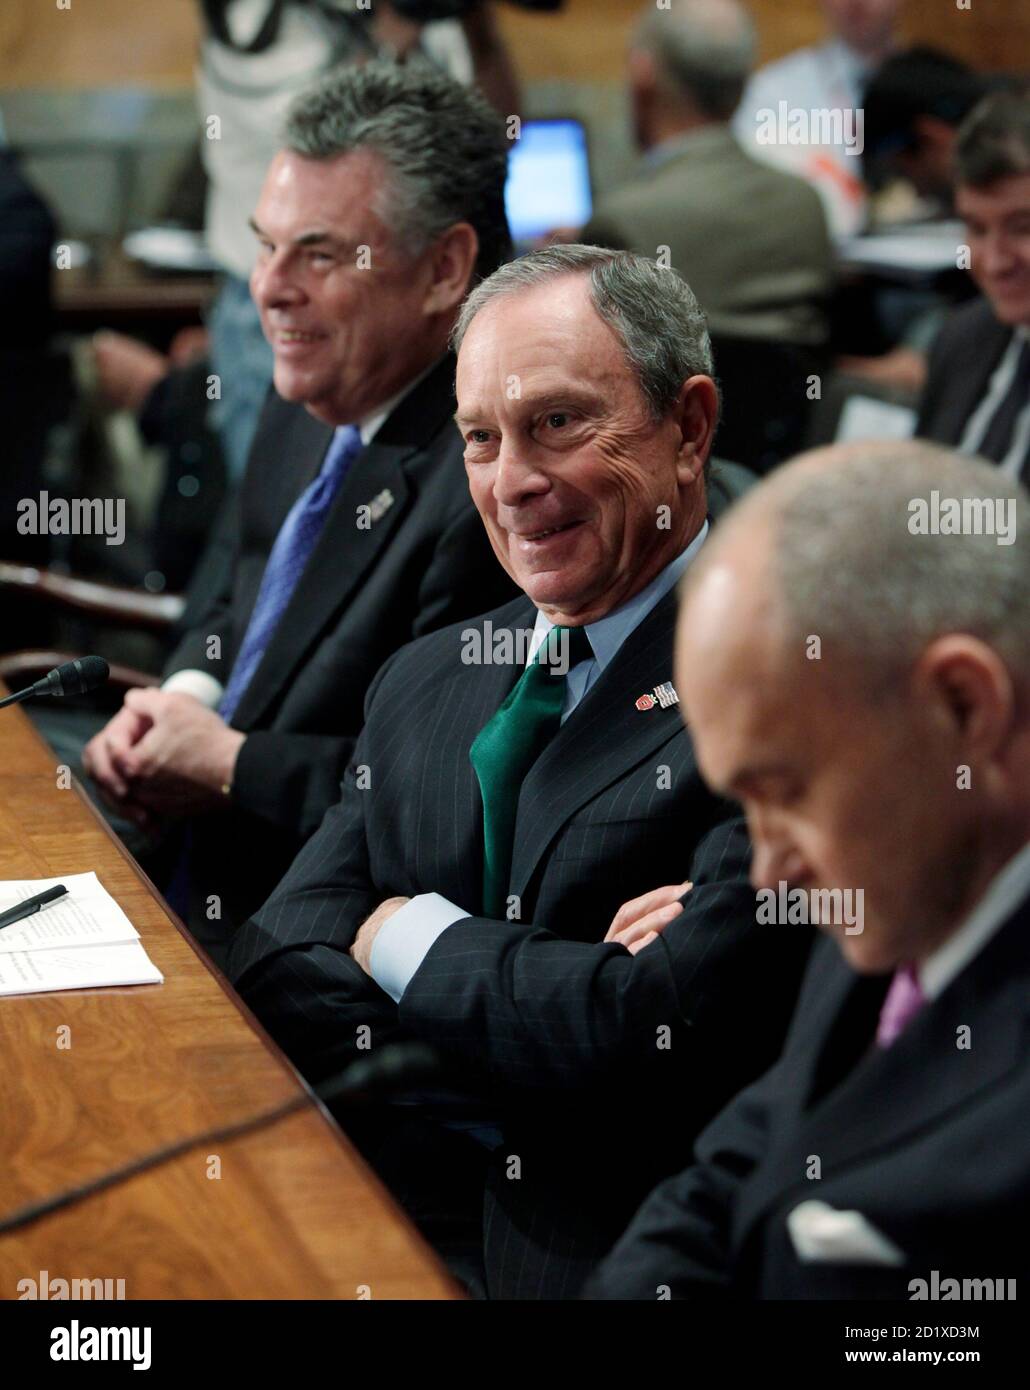 New York City Mayor Michael Bloomberg (C) shares a light moment with New York City Police Commissioner Raymond Kelly (R) and Rep. Peter King (R-NY) as they testify before the Senate Homeland Security and Governmental Affairs Committee on Capitol Hill in Washington May 5, 2010.      REUTERS/Yuri Gripas (UNITED STATES - Tags: POLITICS) Stock Photo